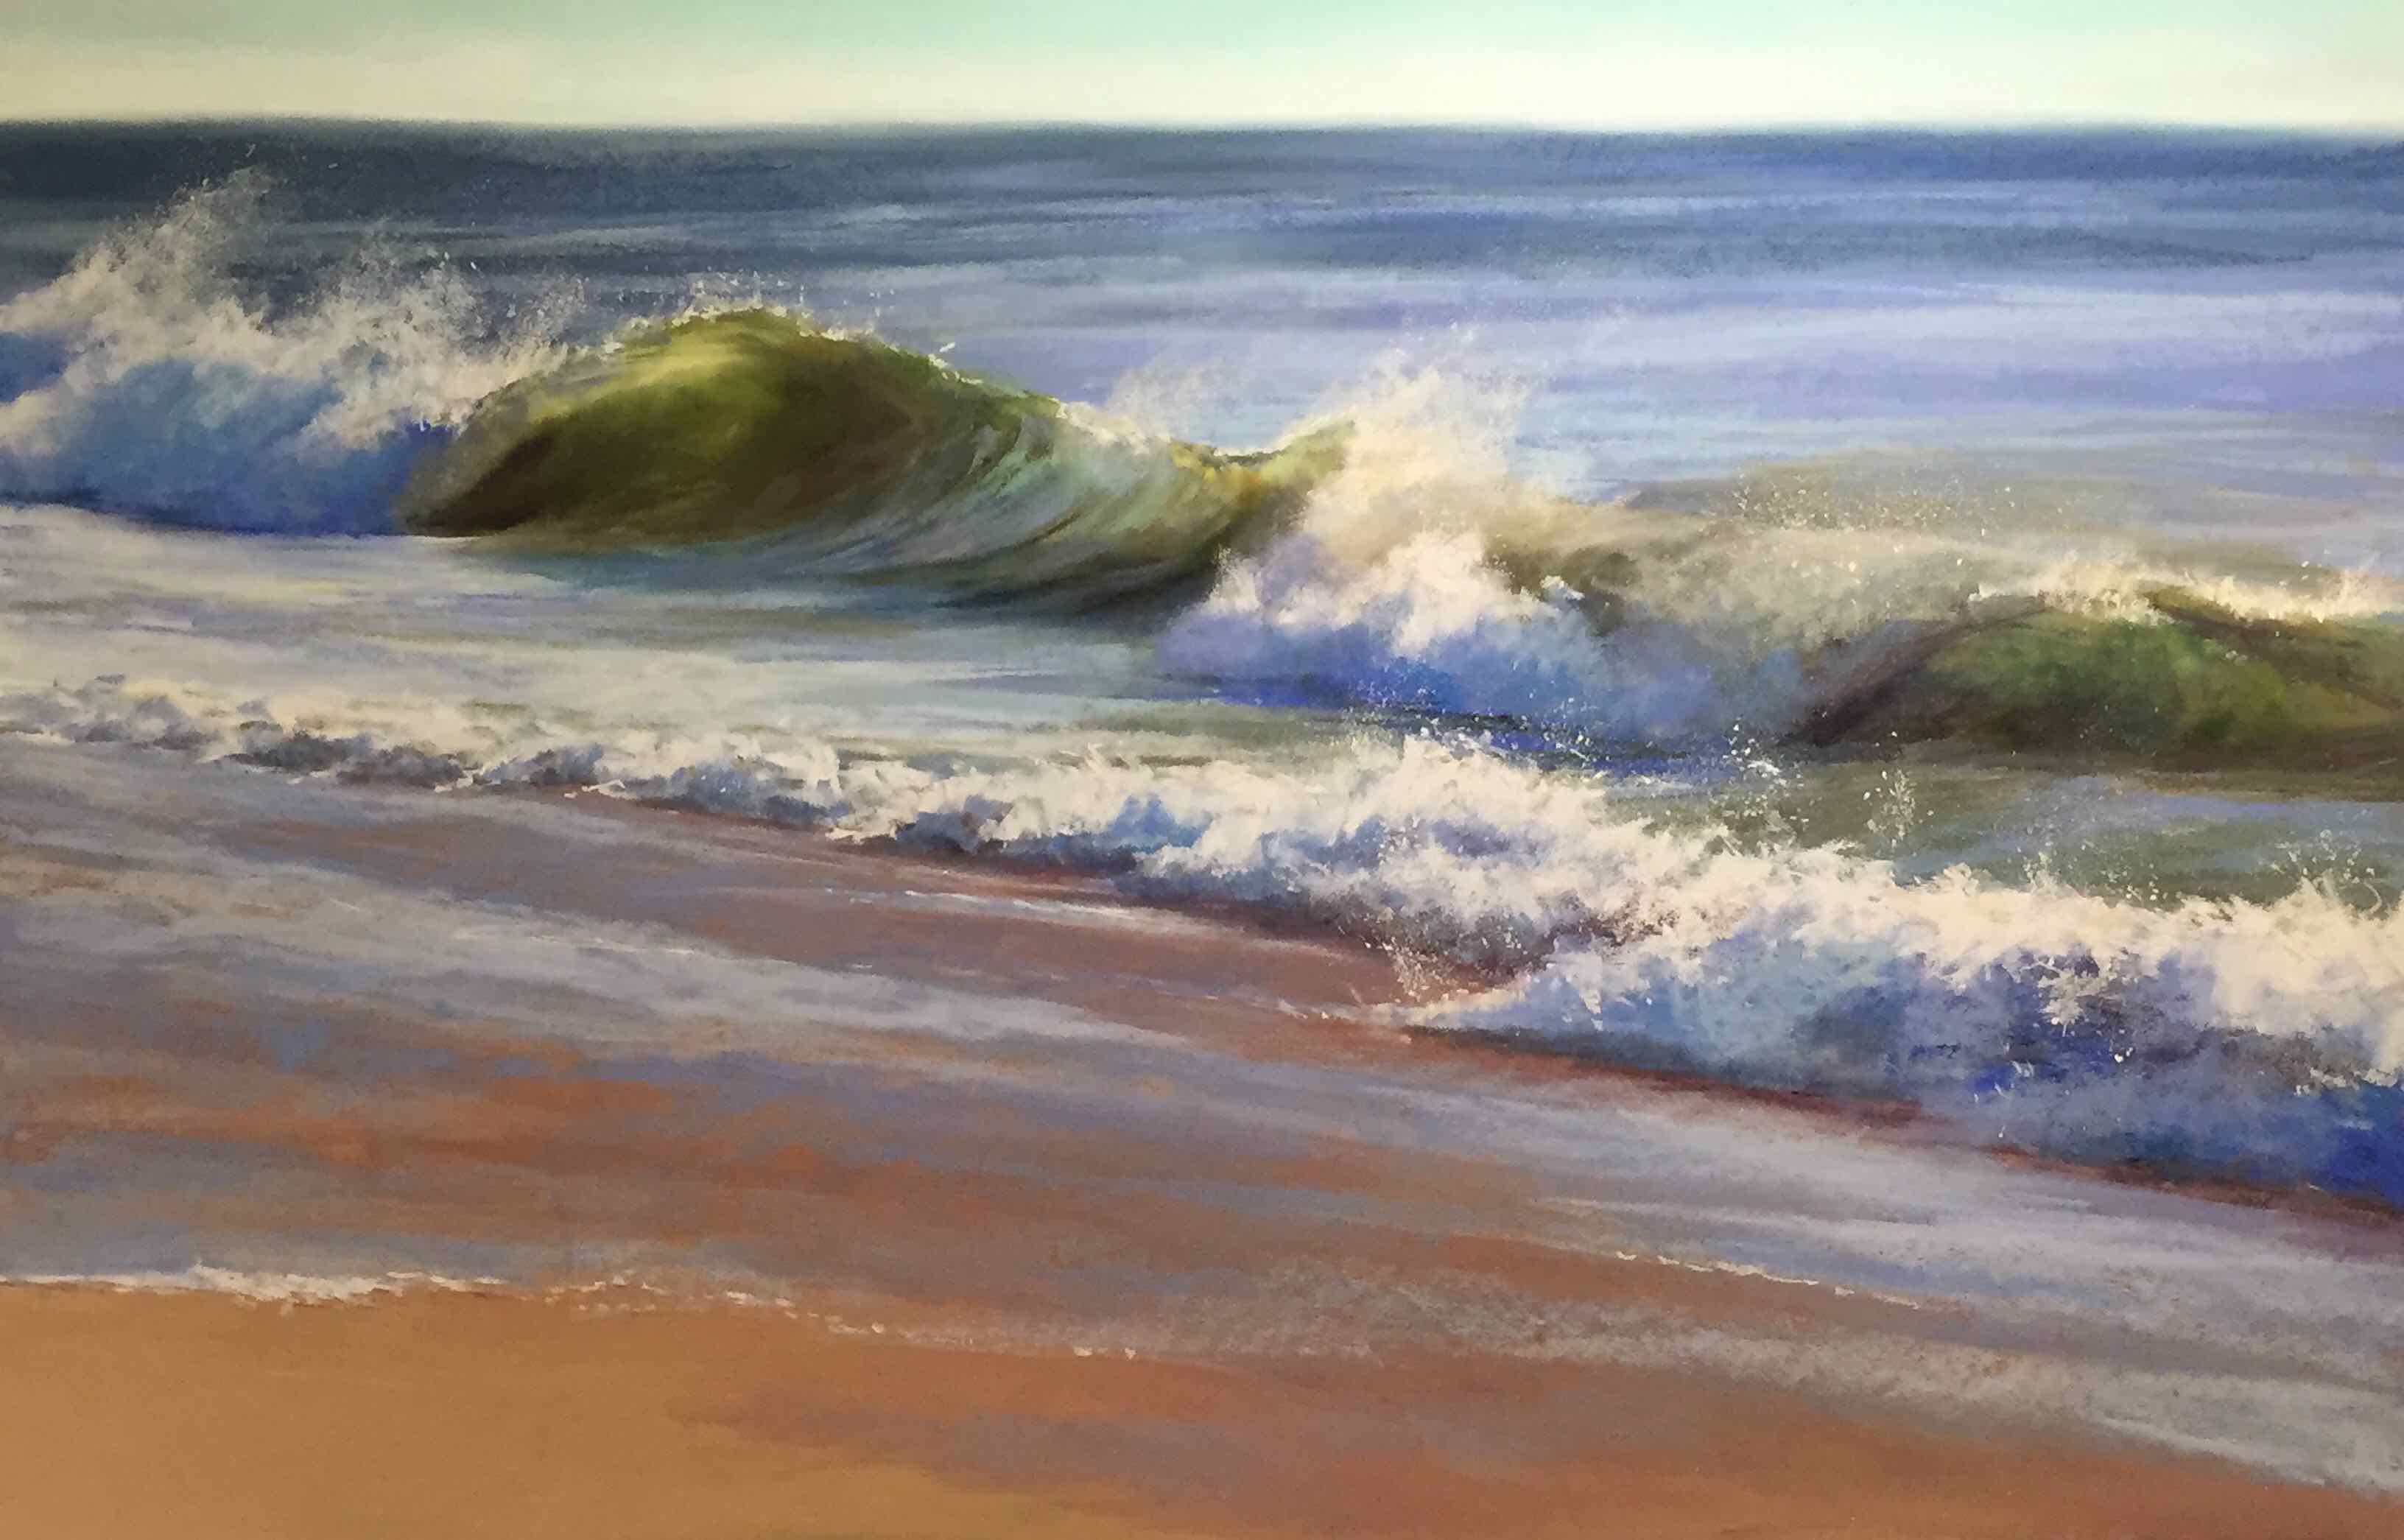 Jeanne Rosier Smith, "A New Day," pastel, 24 x 36in. I caught this spectacular wave after an all-night rainstorm.